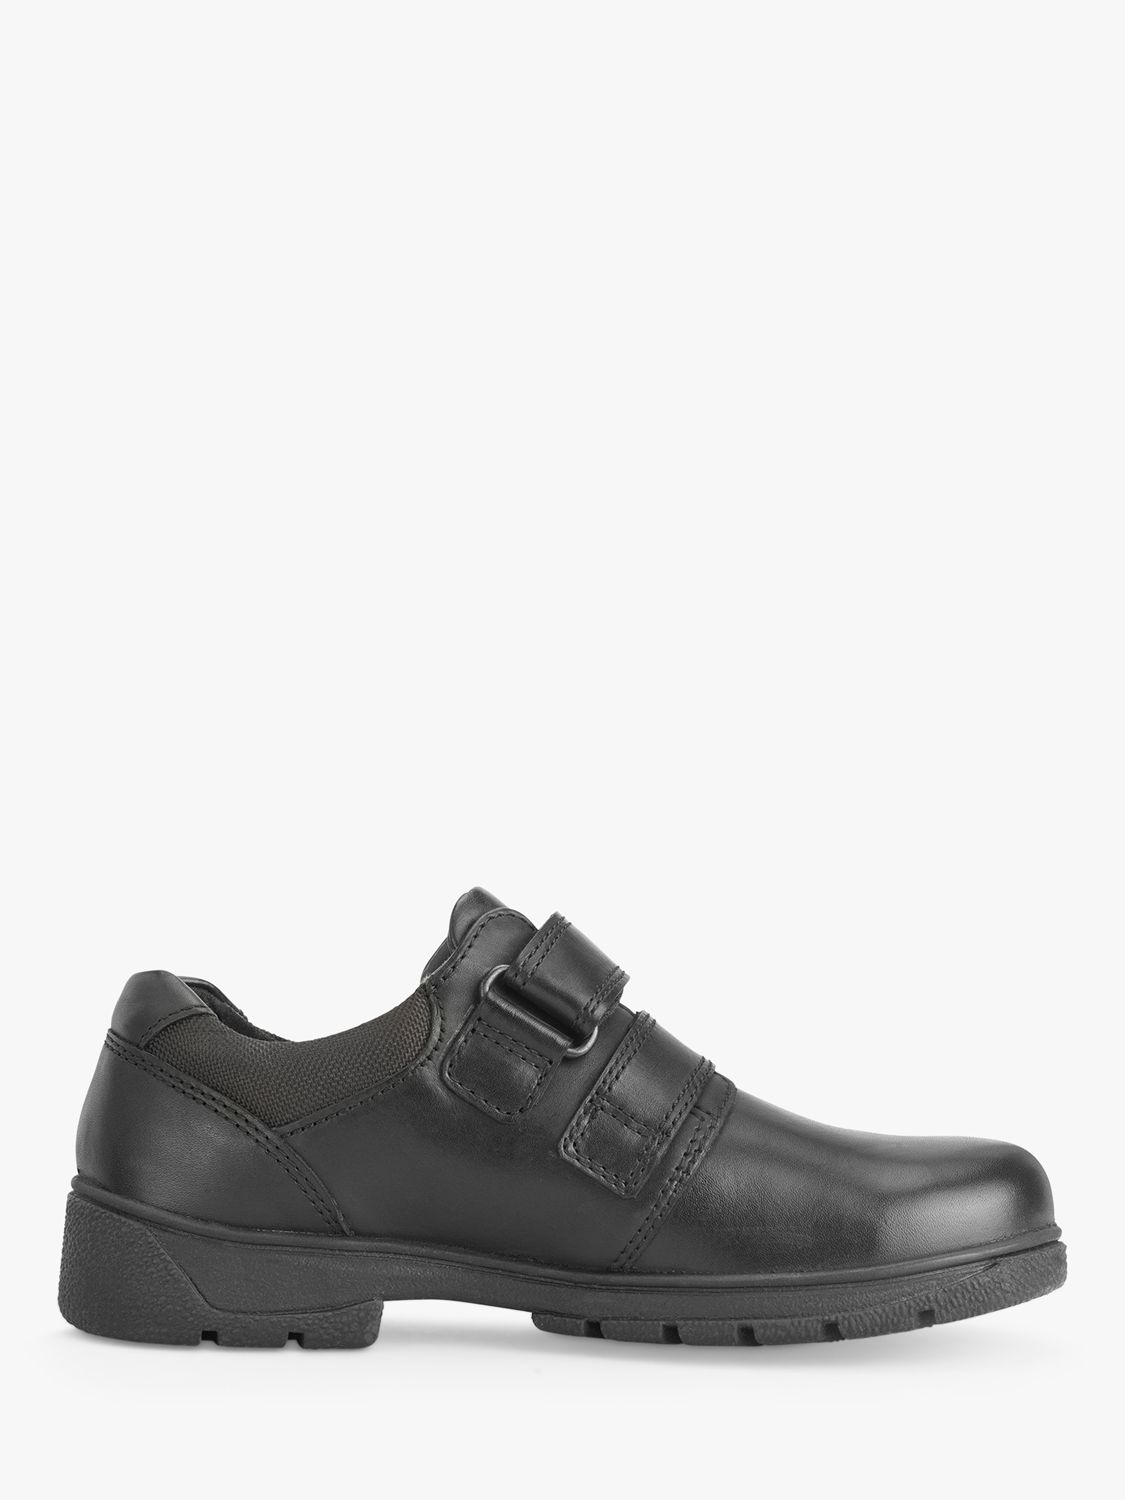 Buy Simply by Start-Rite Kids' Subject Leather School Shoes Online at johnlewis.com